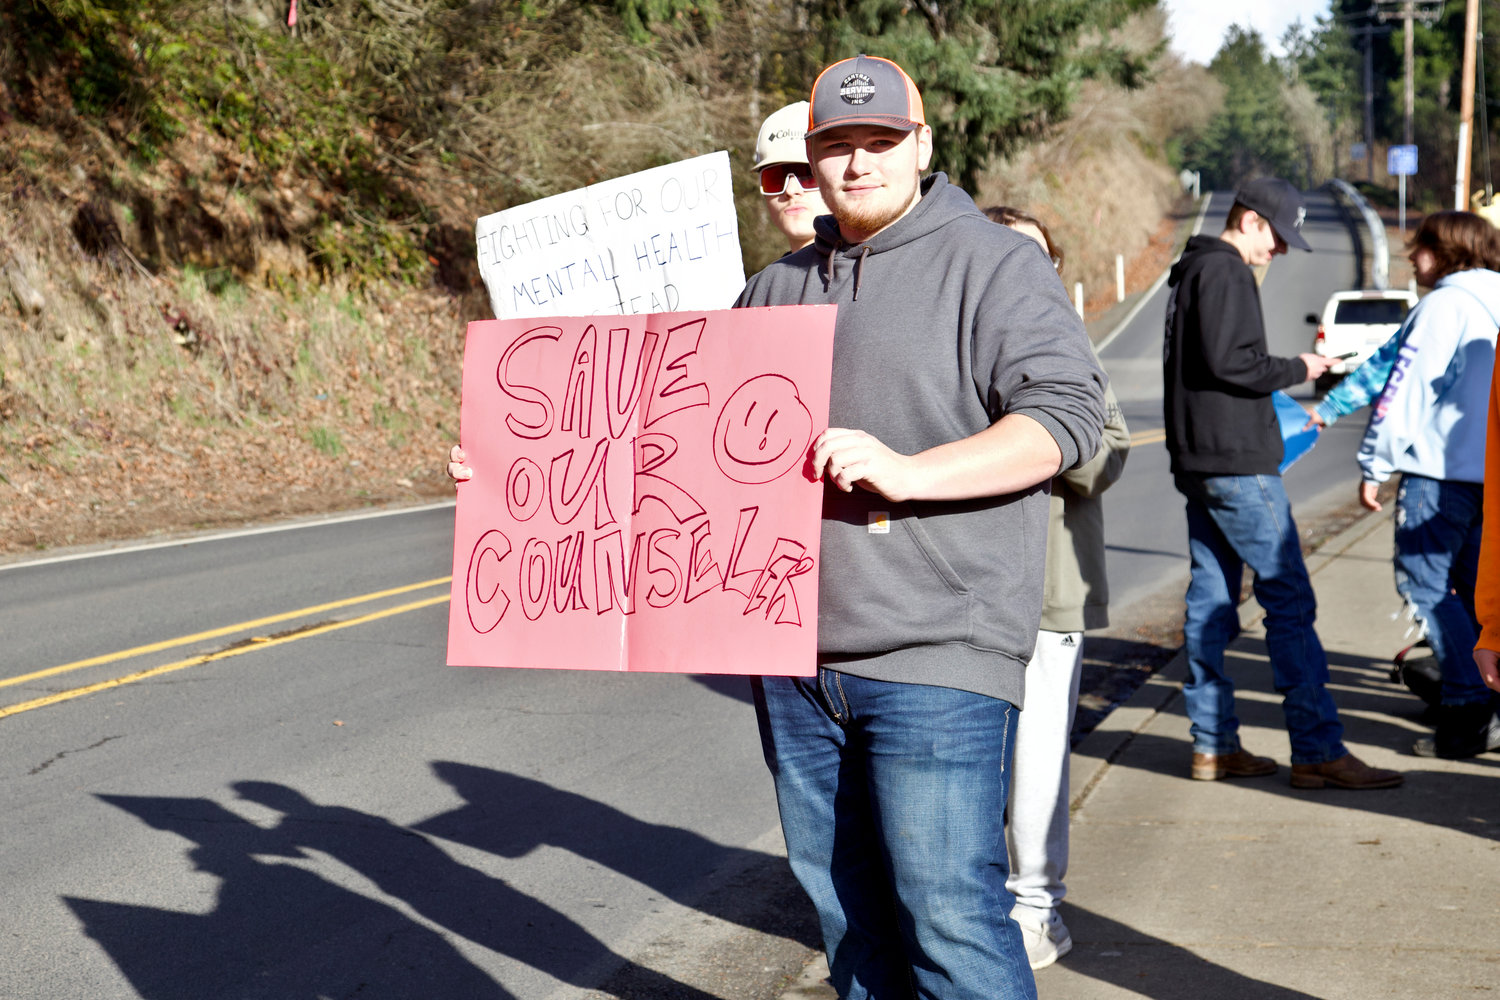 Winlock High School Senior Austin Allen holds up a sign during a protest against the Winlock School District’s plan to lay off two school counselors in Winlock on Wednesday.